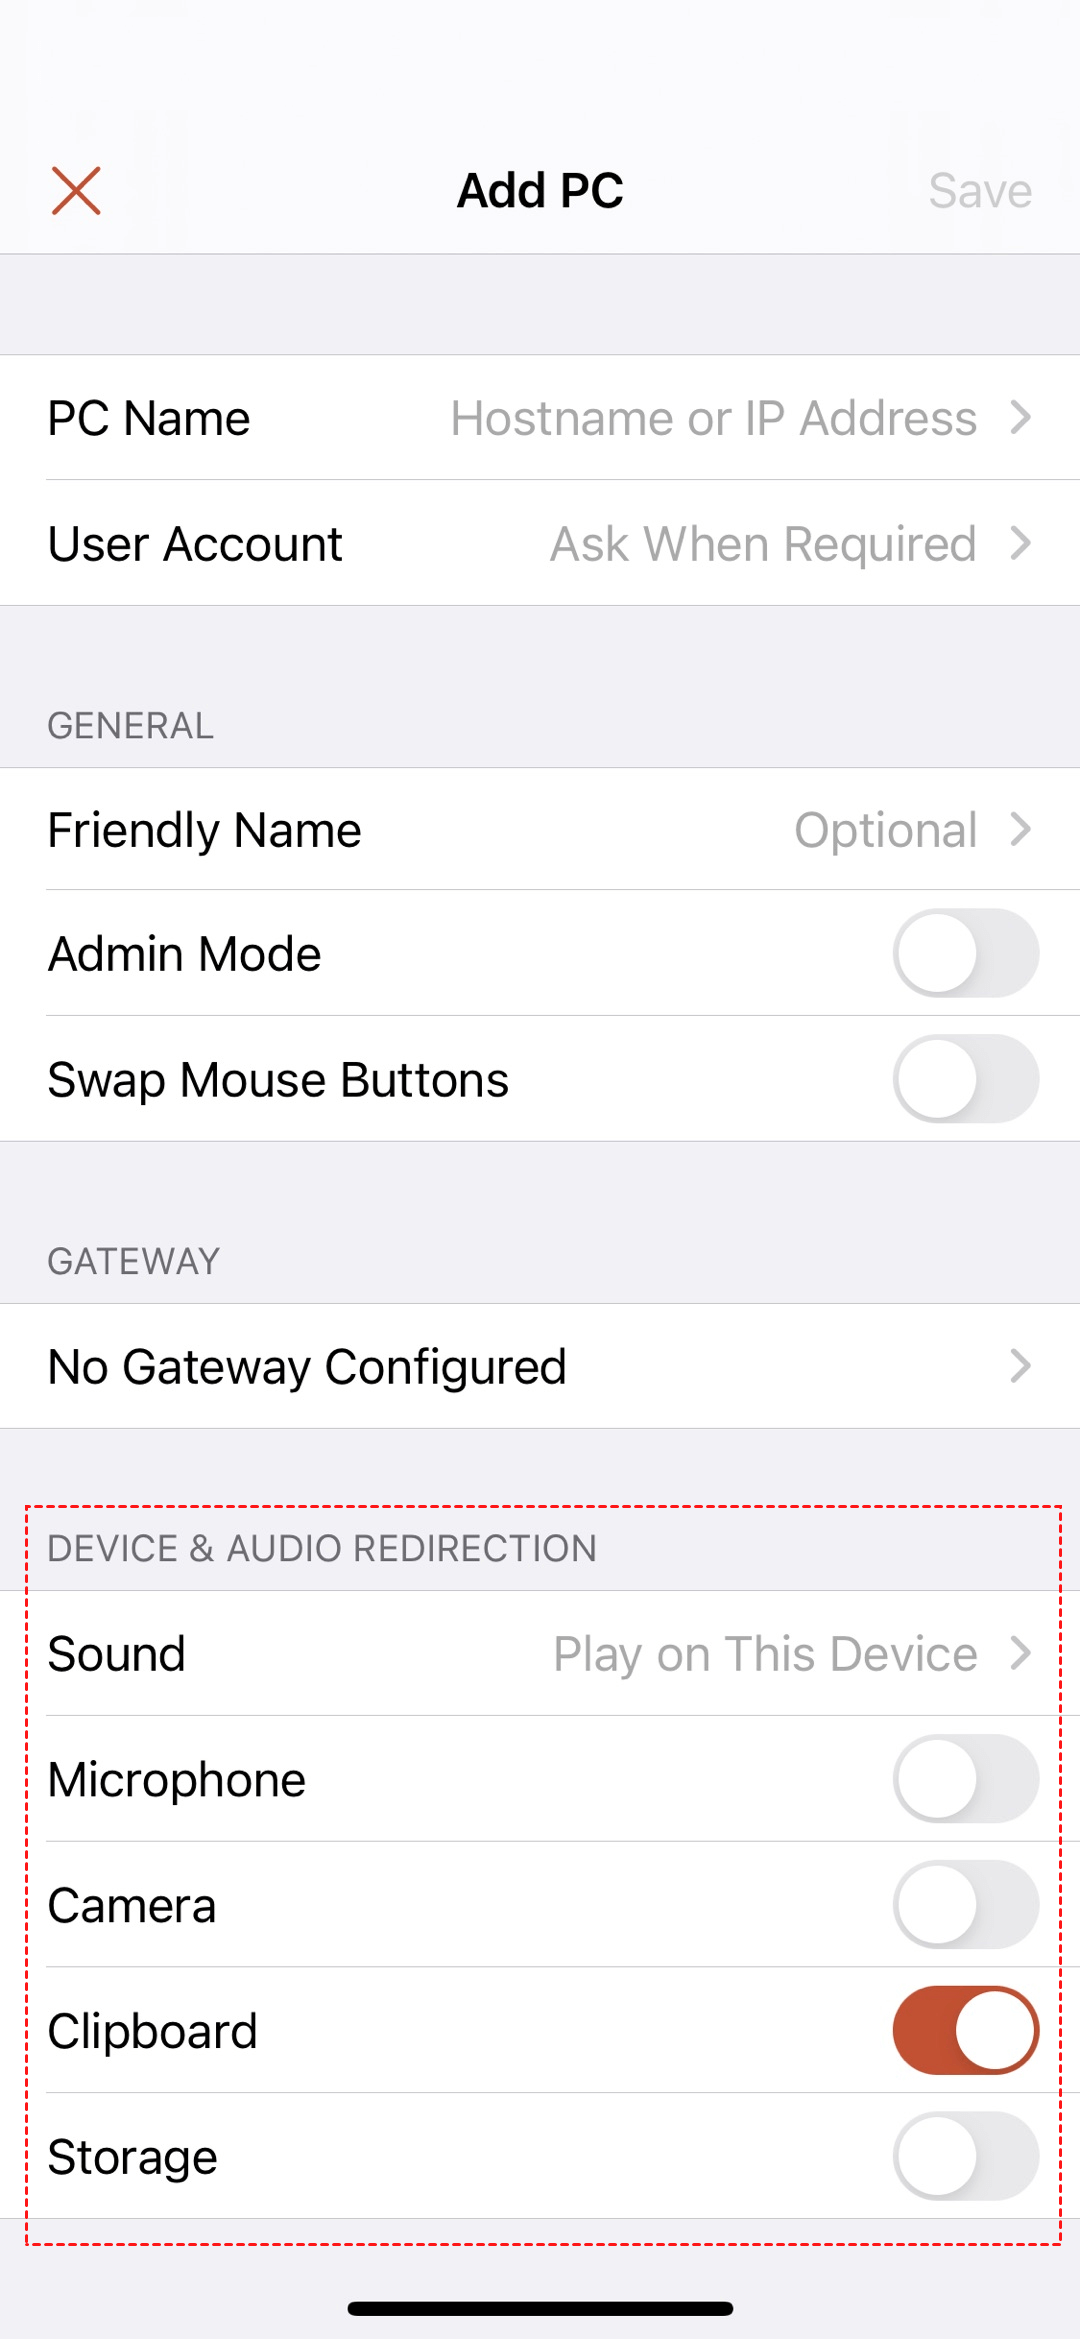 Devices and Audio Redirection